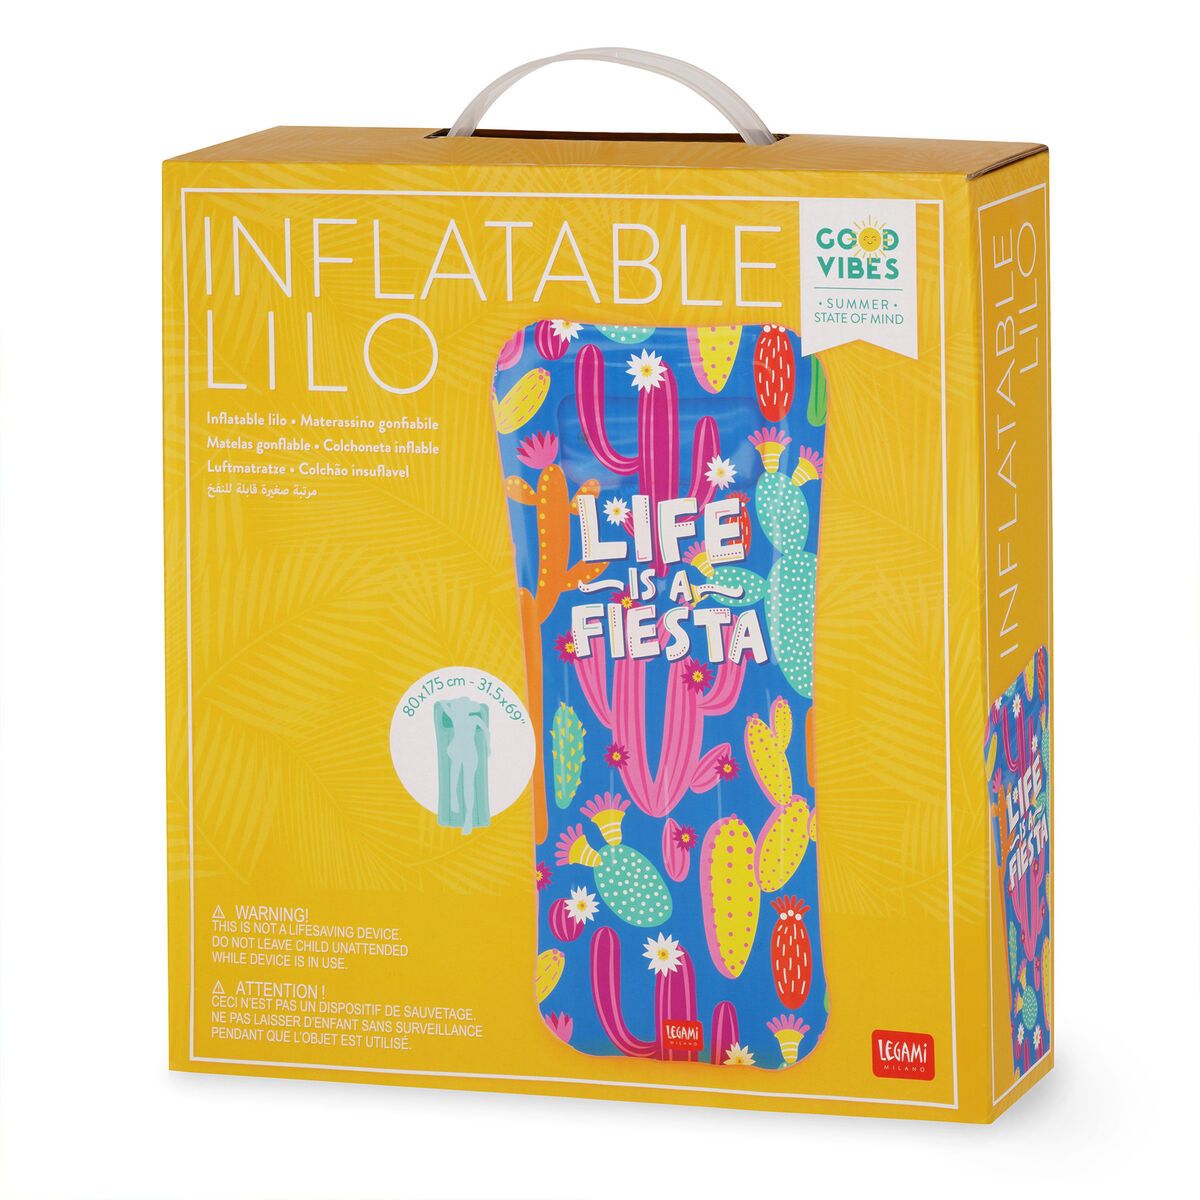 Matelas Gonflable - Inflatable Lilo, , zoo